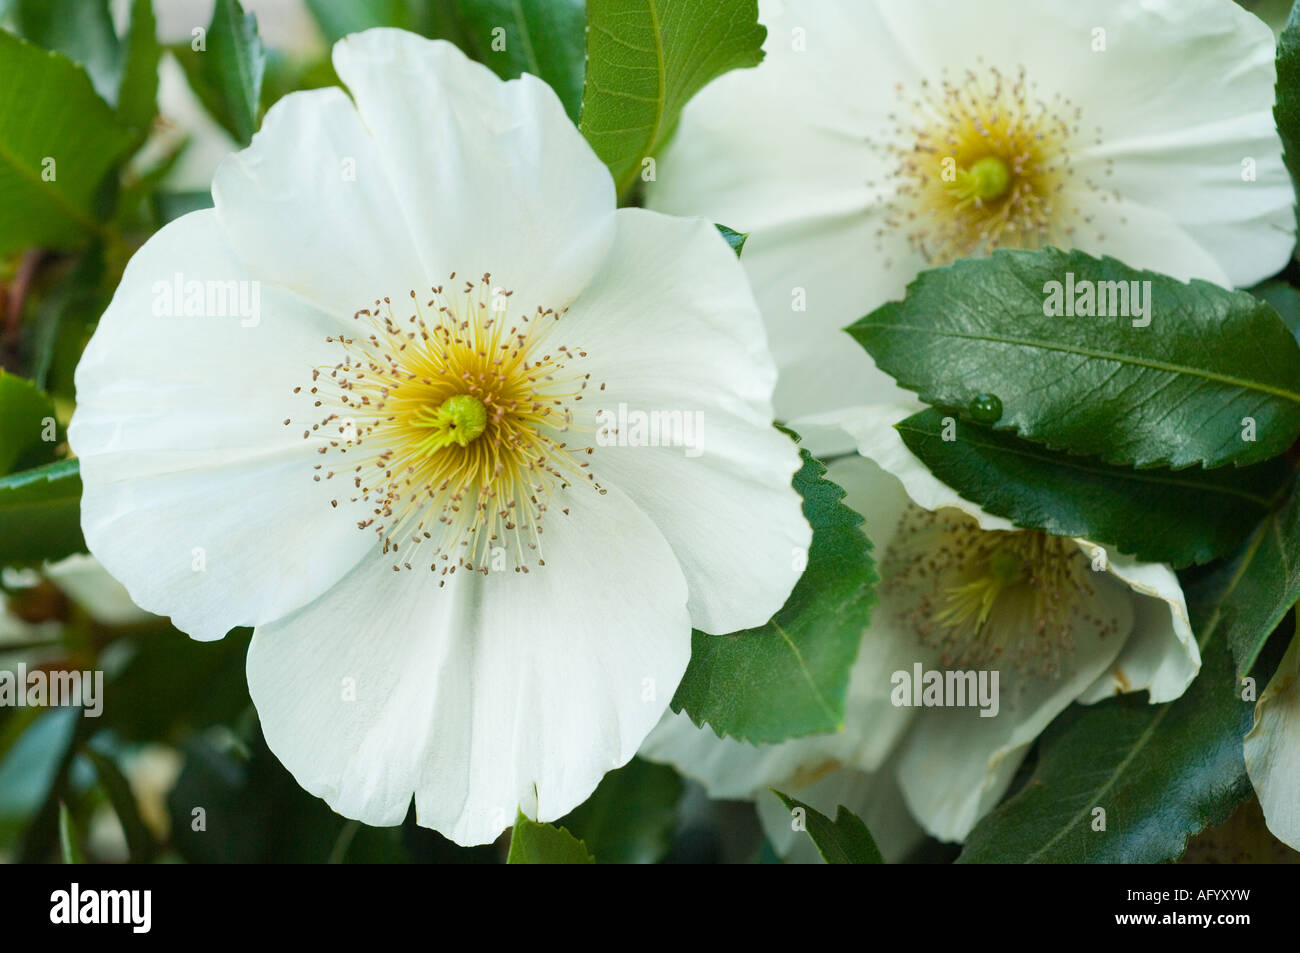 Eucryphia glutinosa close-up of flowers, cultivated tree, Arboretum Dundee Scotland UK Europe. Endemic to Central Chile. Stock Photo